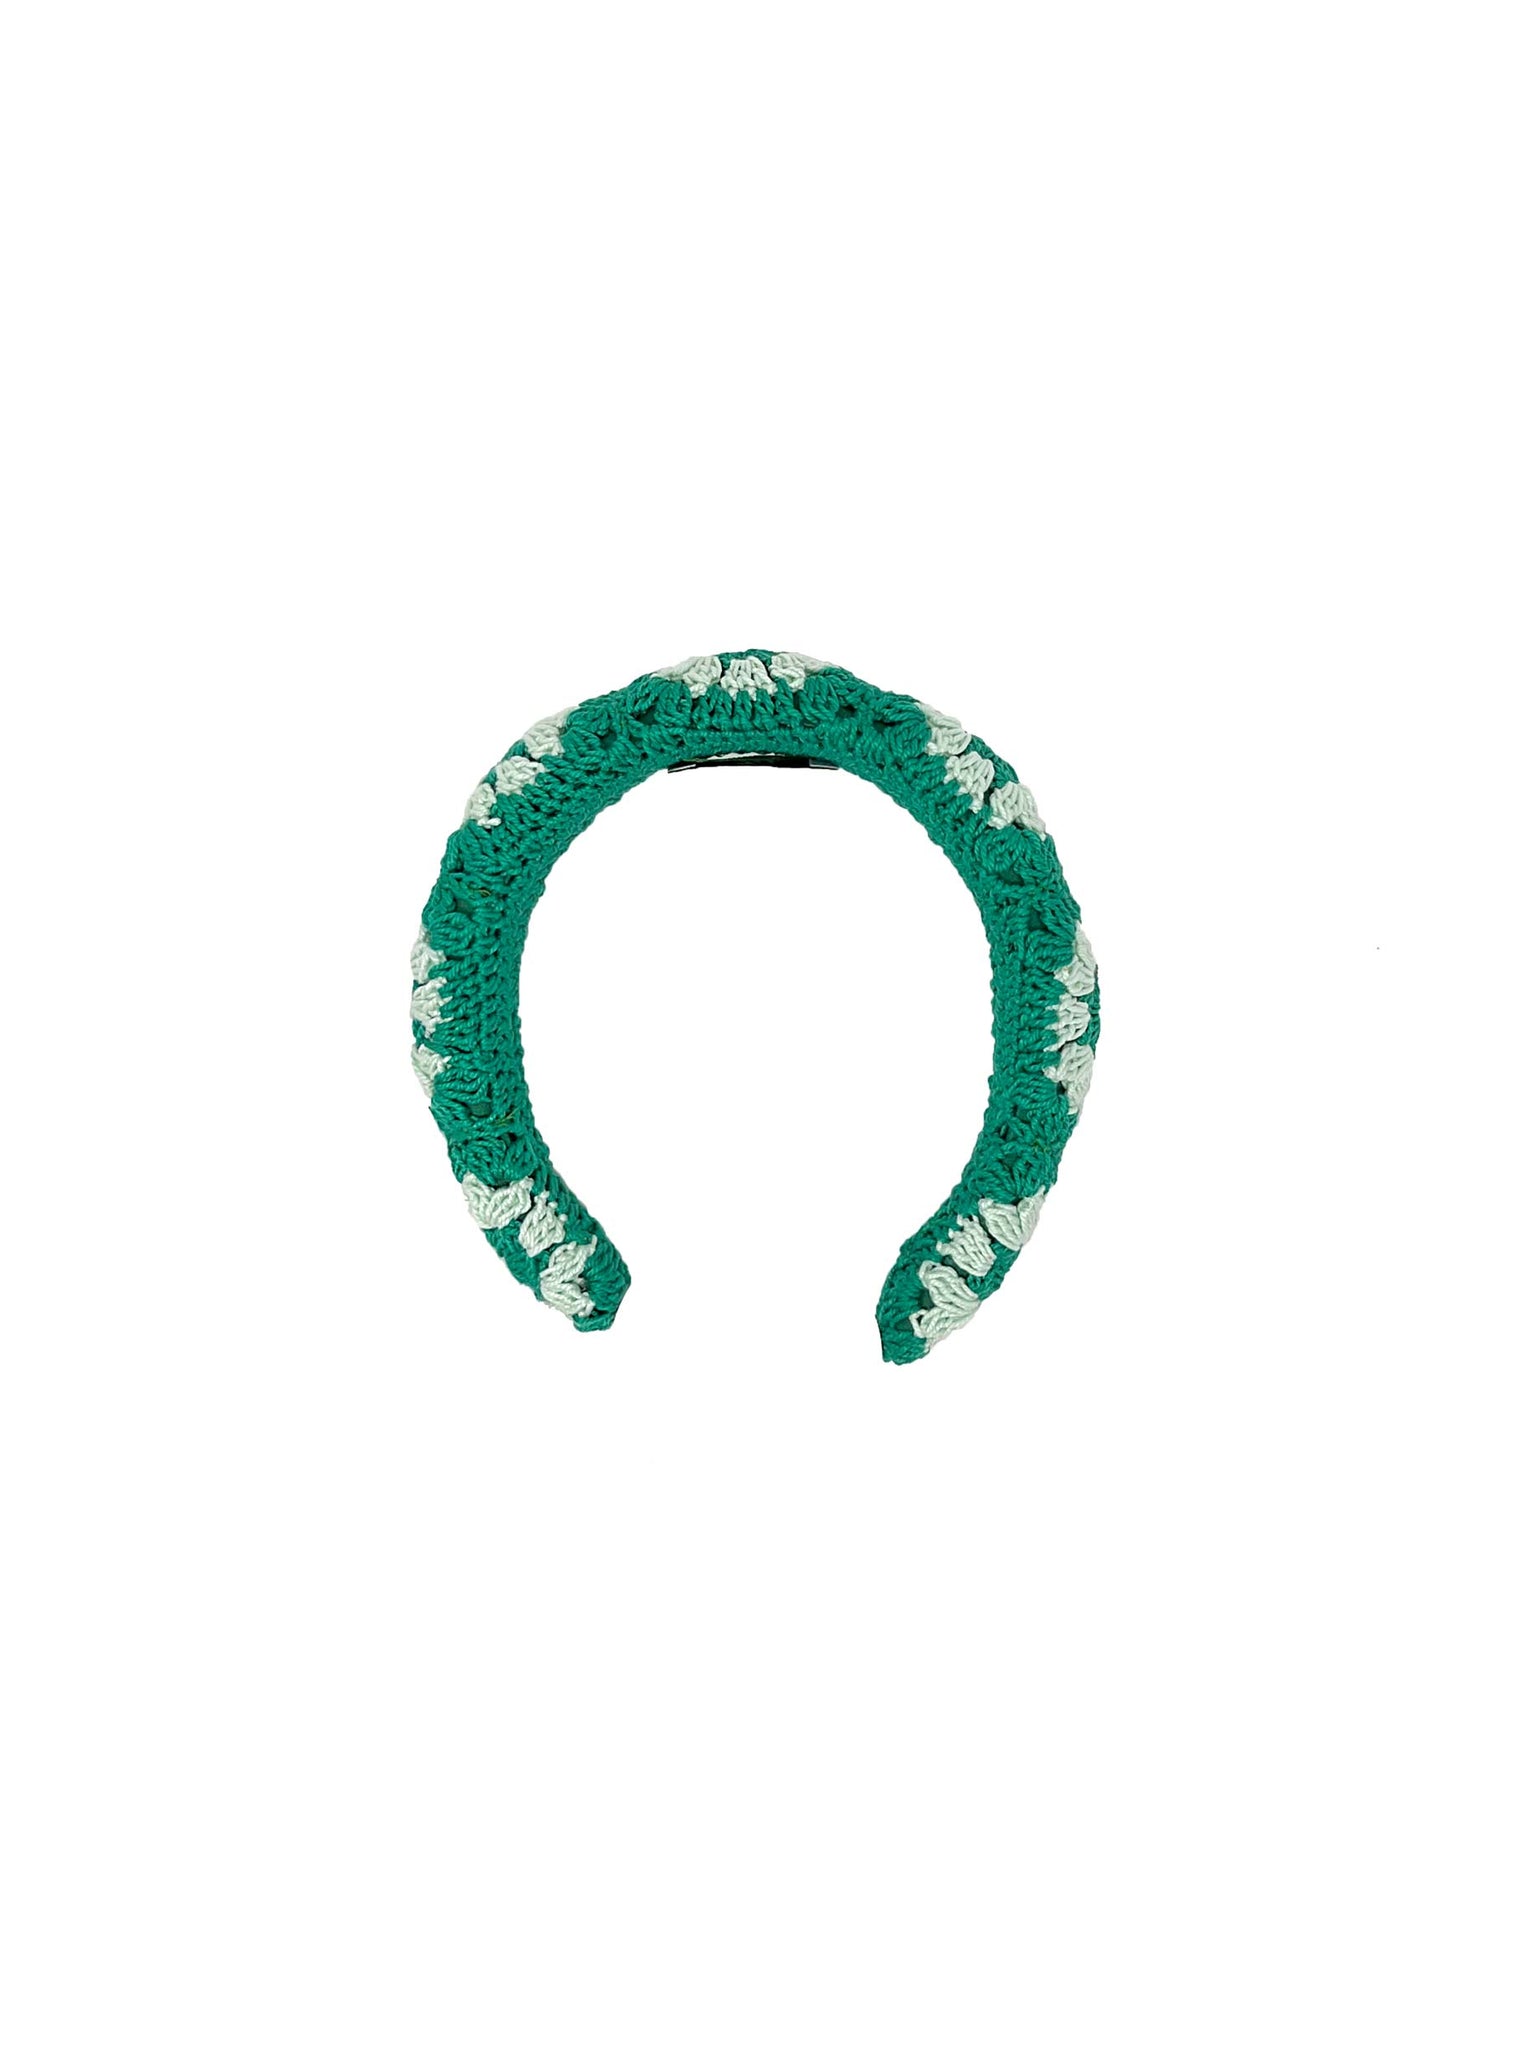 Emerald green and green mint crochet padded hairband